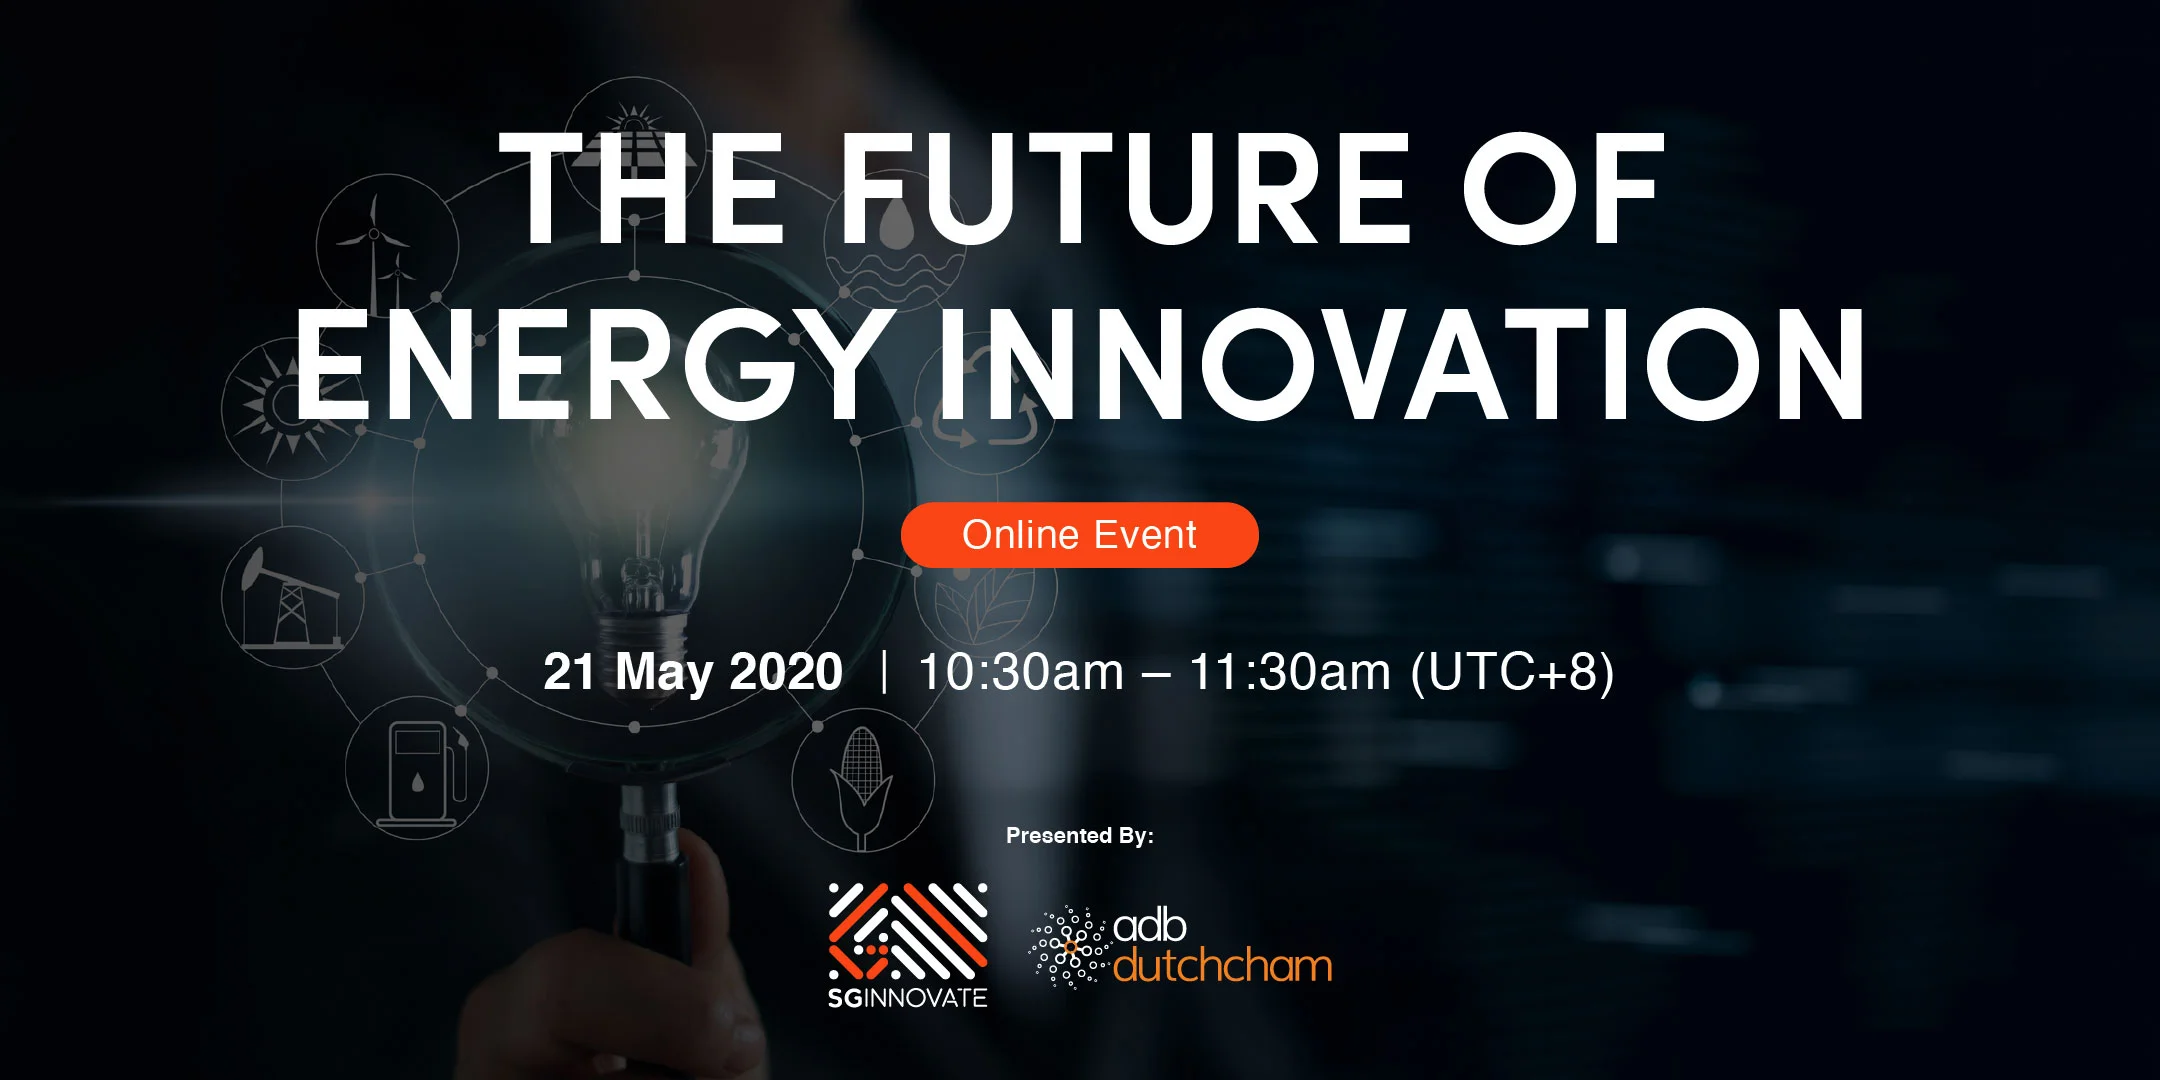 The Future of Energy Innovation